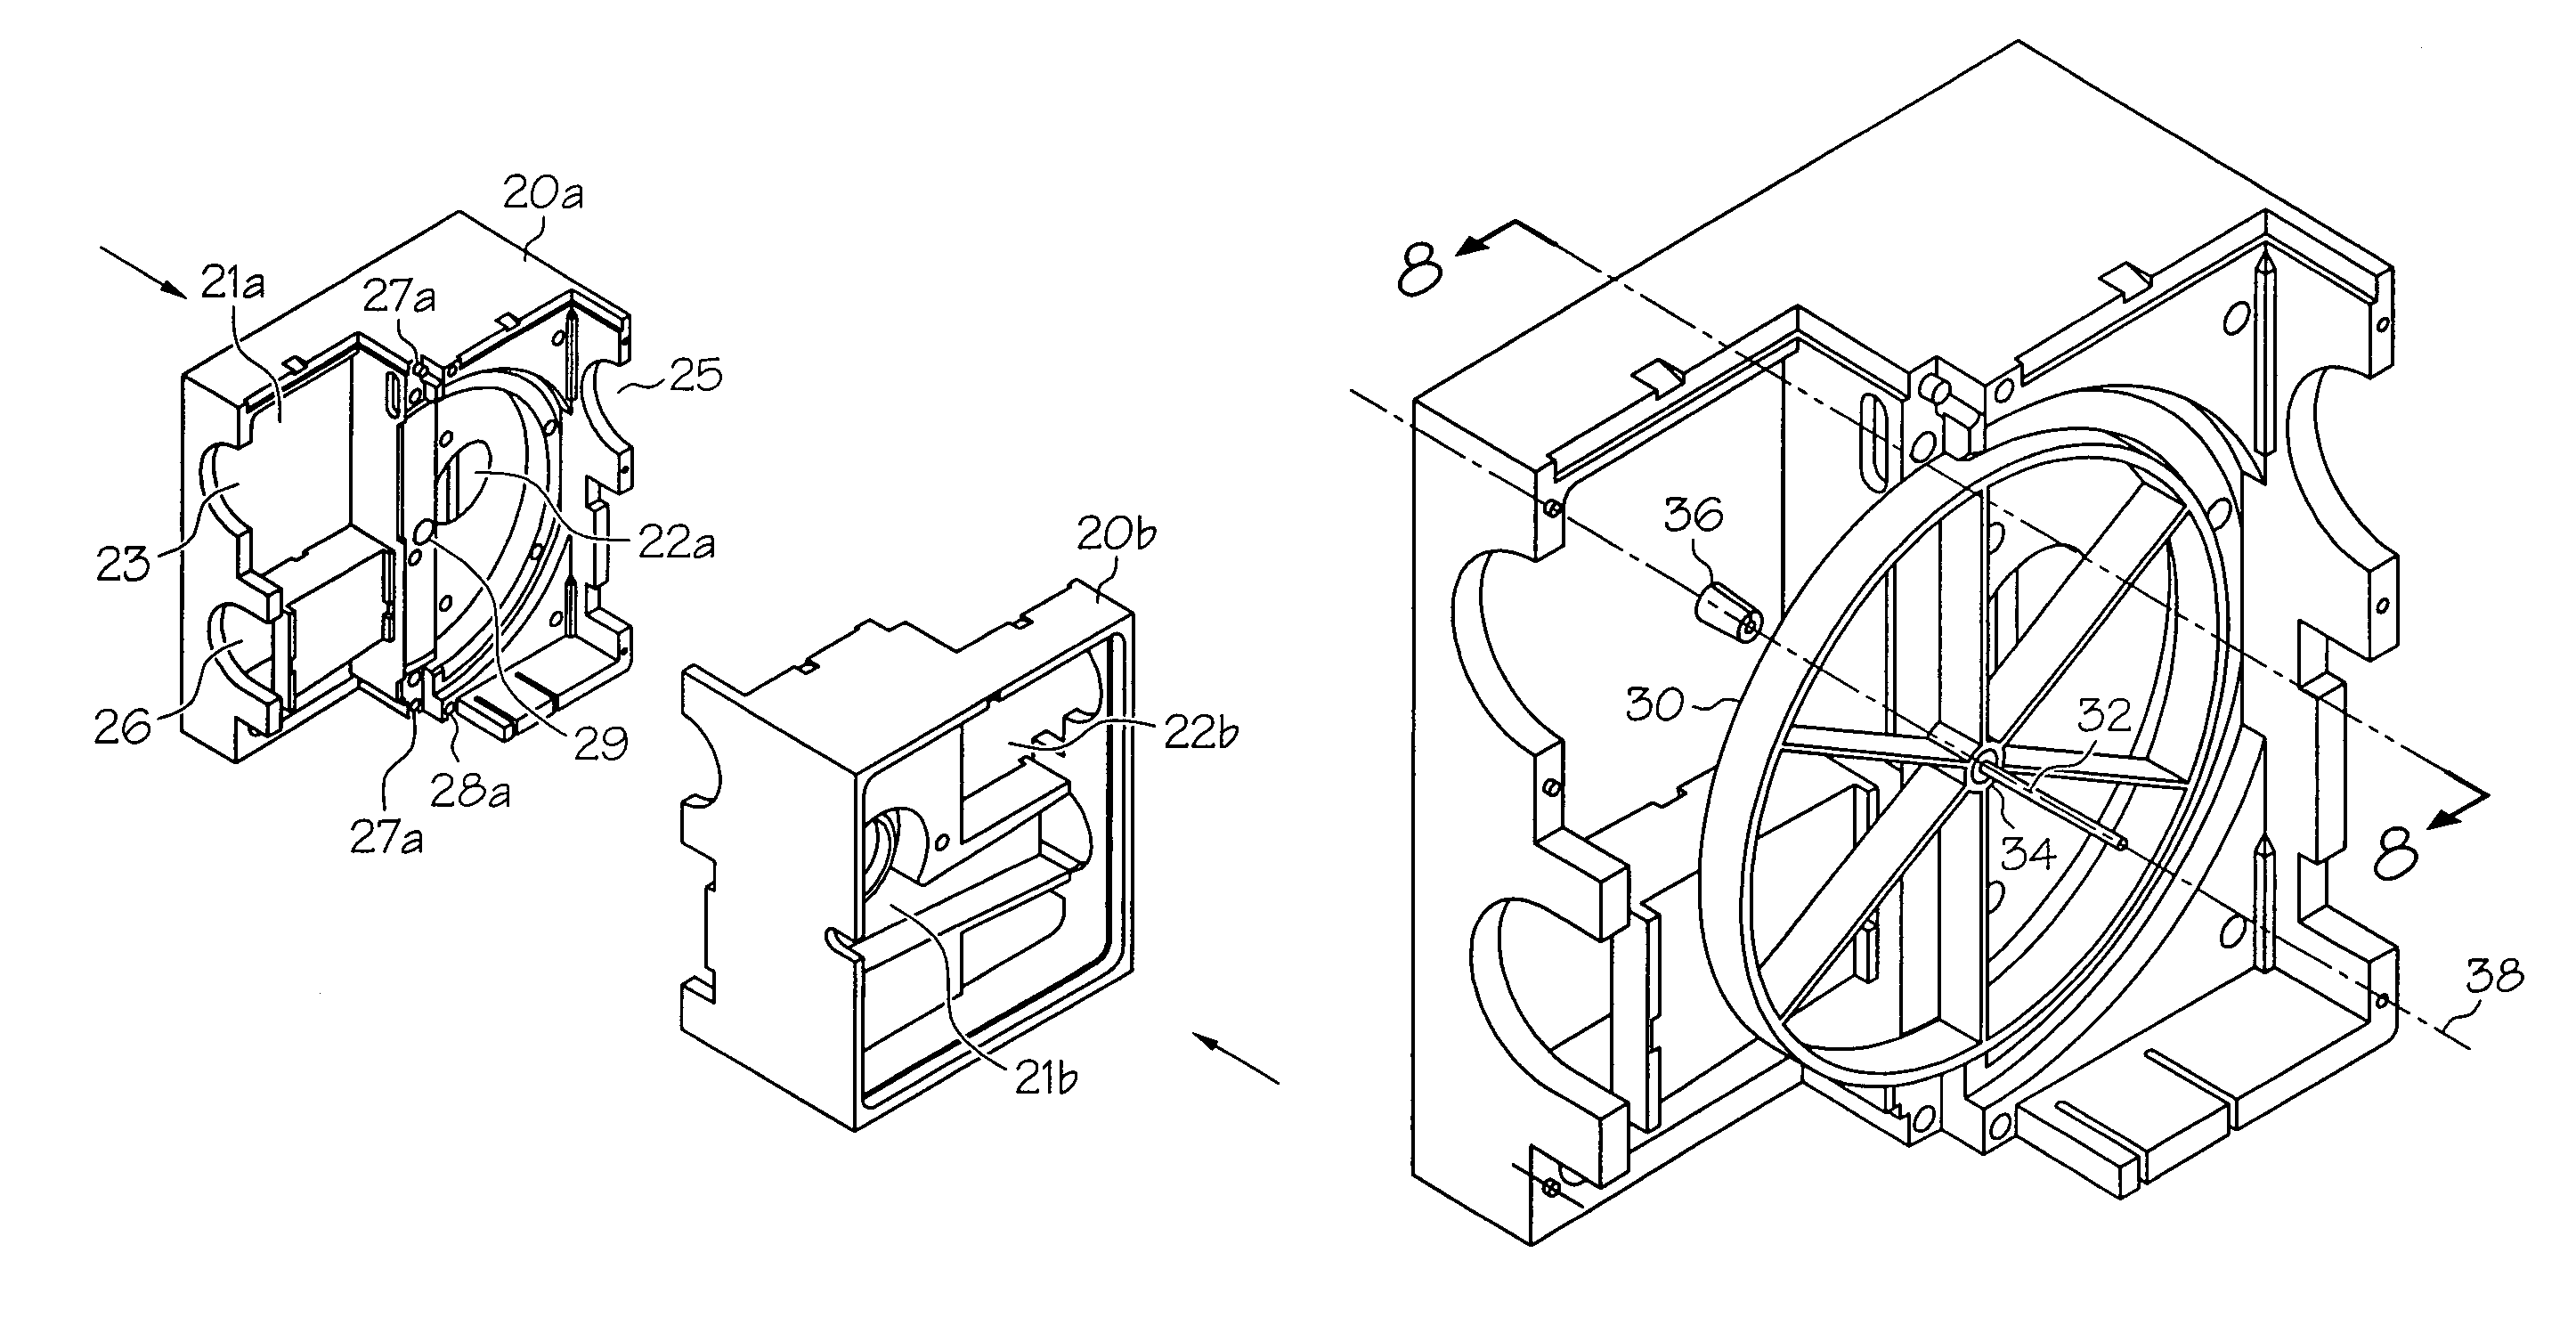 Heat and energy recovery ventilators and methods of use